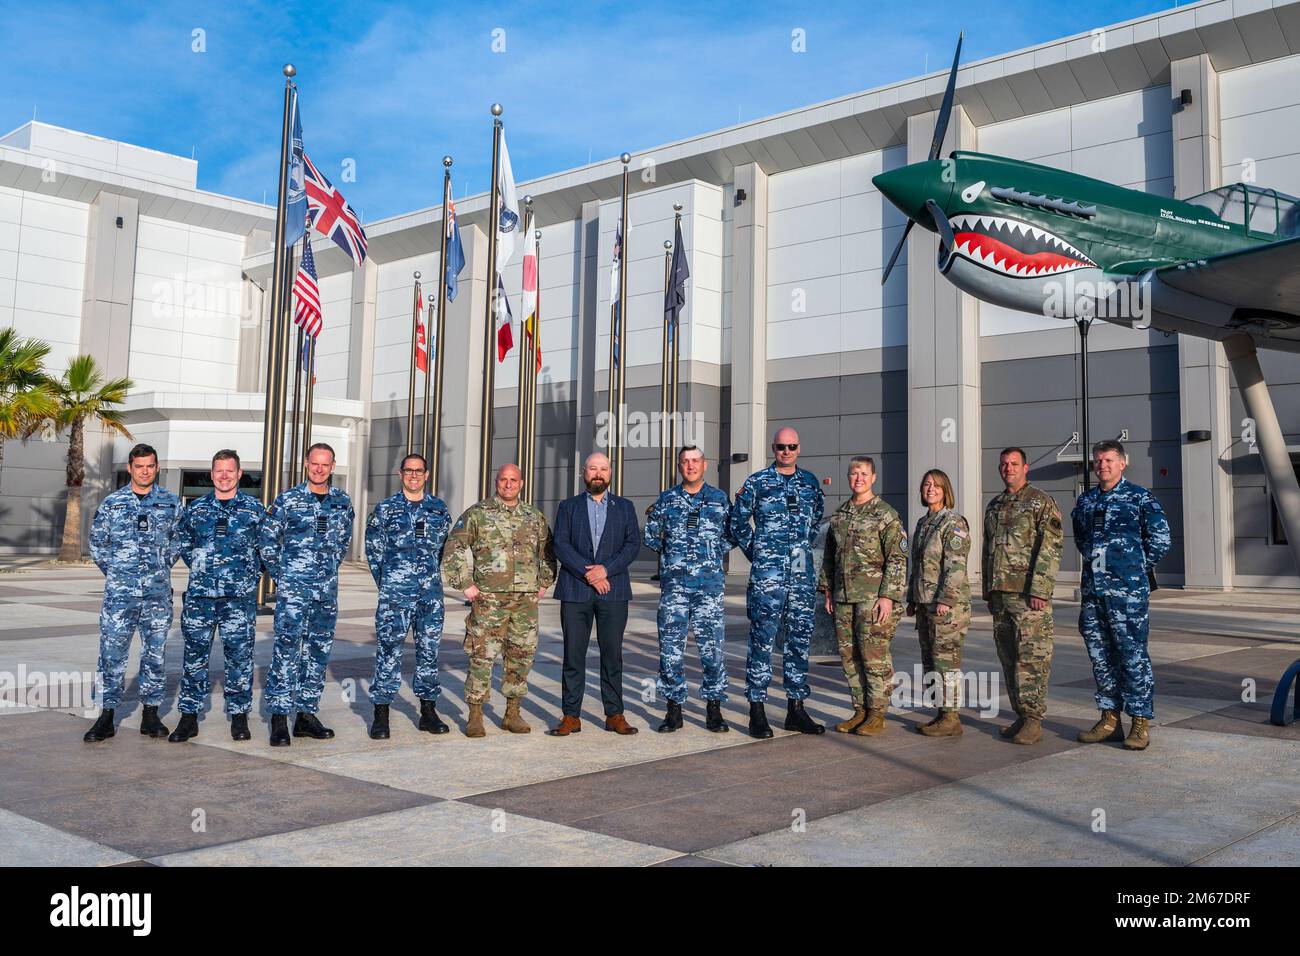 Combined Force Space Component Command commander Maj. Gen. DeAnna Burt (fourth from right) stands with Australian Defence Force air and space attaché Air Commodore John Haly (fifth from right), along with other members of Australia’s Defence Space Command and leaders from CFSCC and the Combined Space Operations Center, in front of the CFSCC headquarters building on Apr. 11, 2022, at Vandenberg Space Force Base, Calif. Haly spent part of the day with CFSCC leadership and toured the CSpOC to become more familiar with the organizations’ space command and control mission. Haly’s visit offered a va Stock Photo